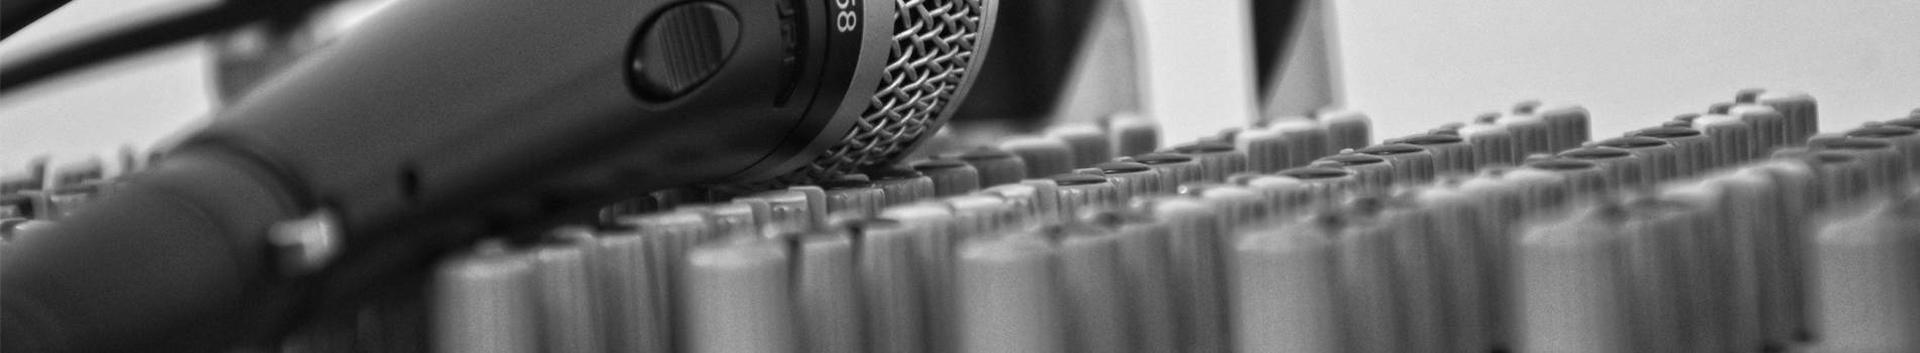 Sound recording services, Media and Printing, Audio Recording